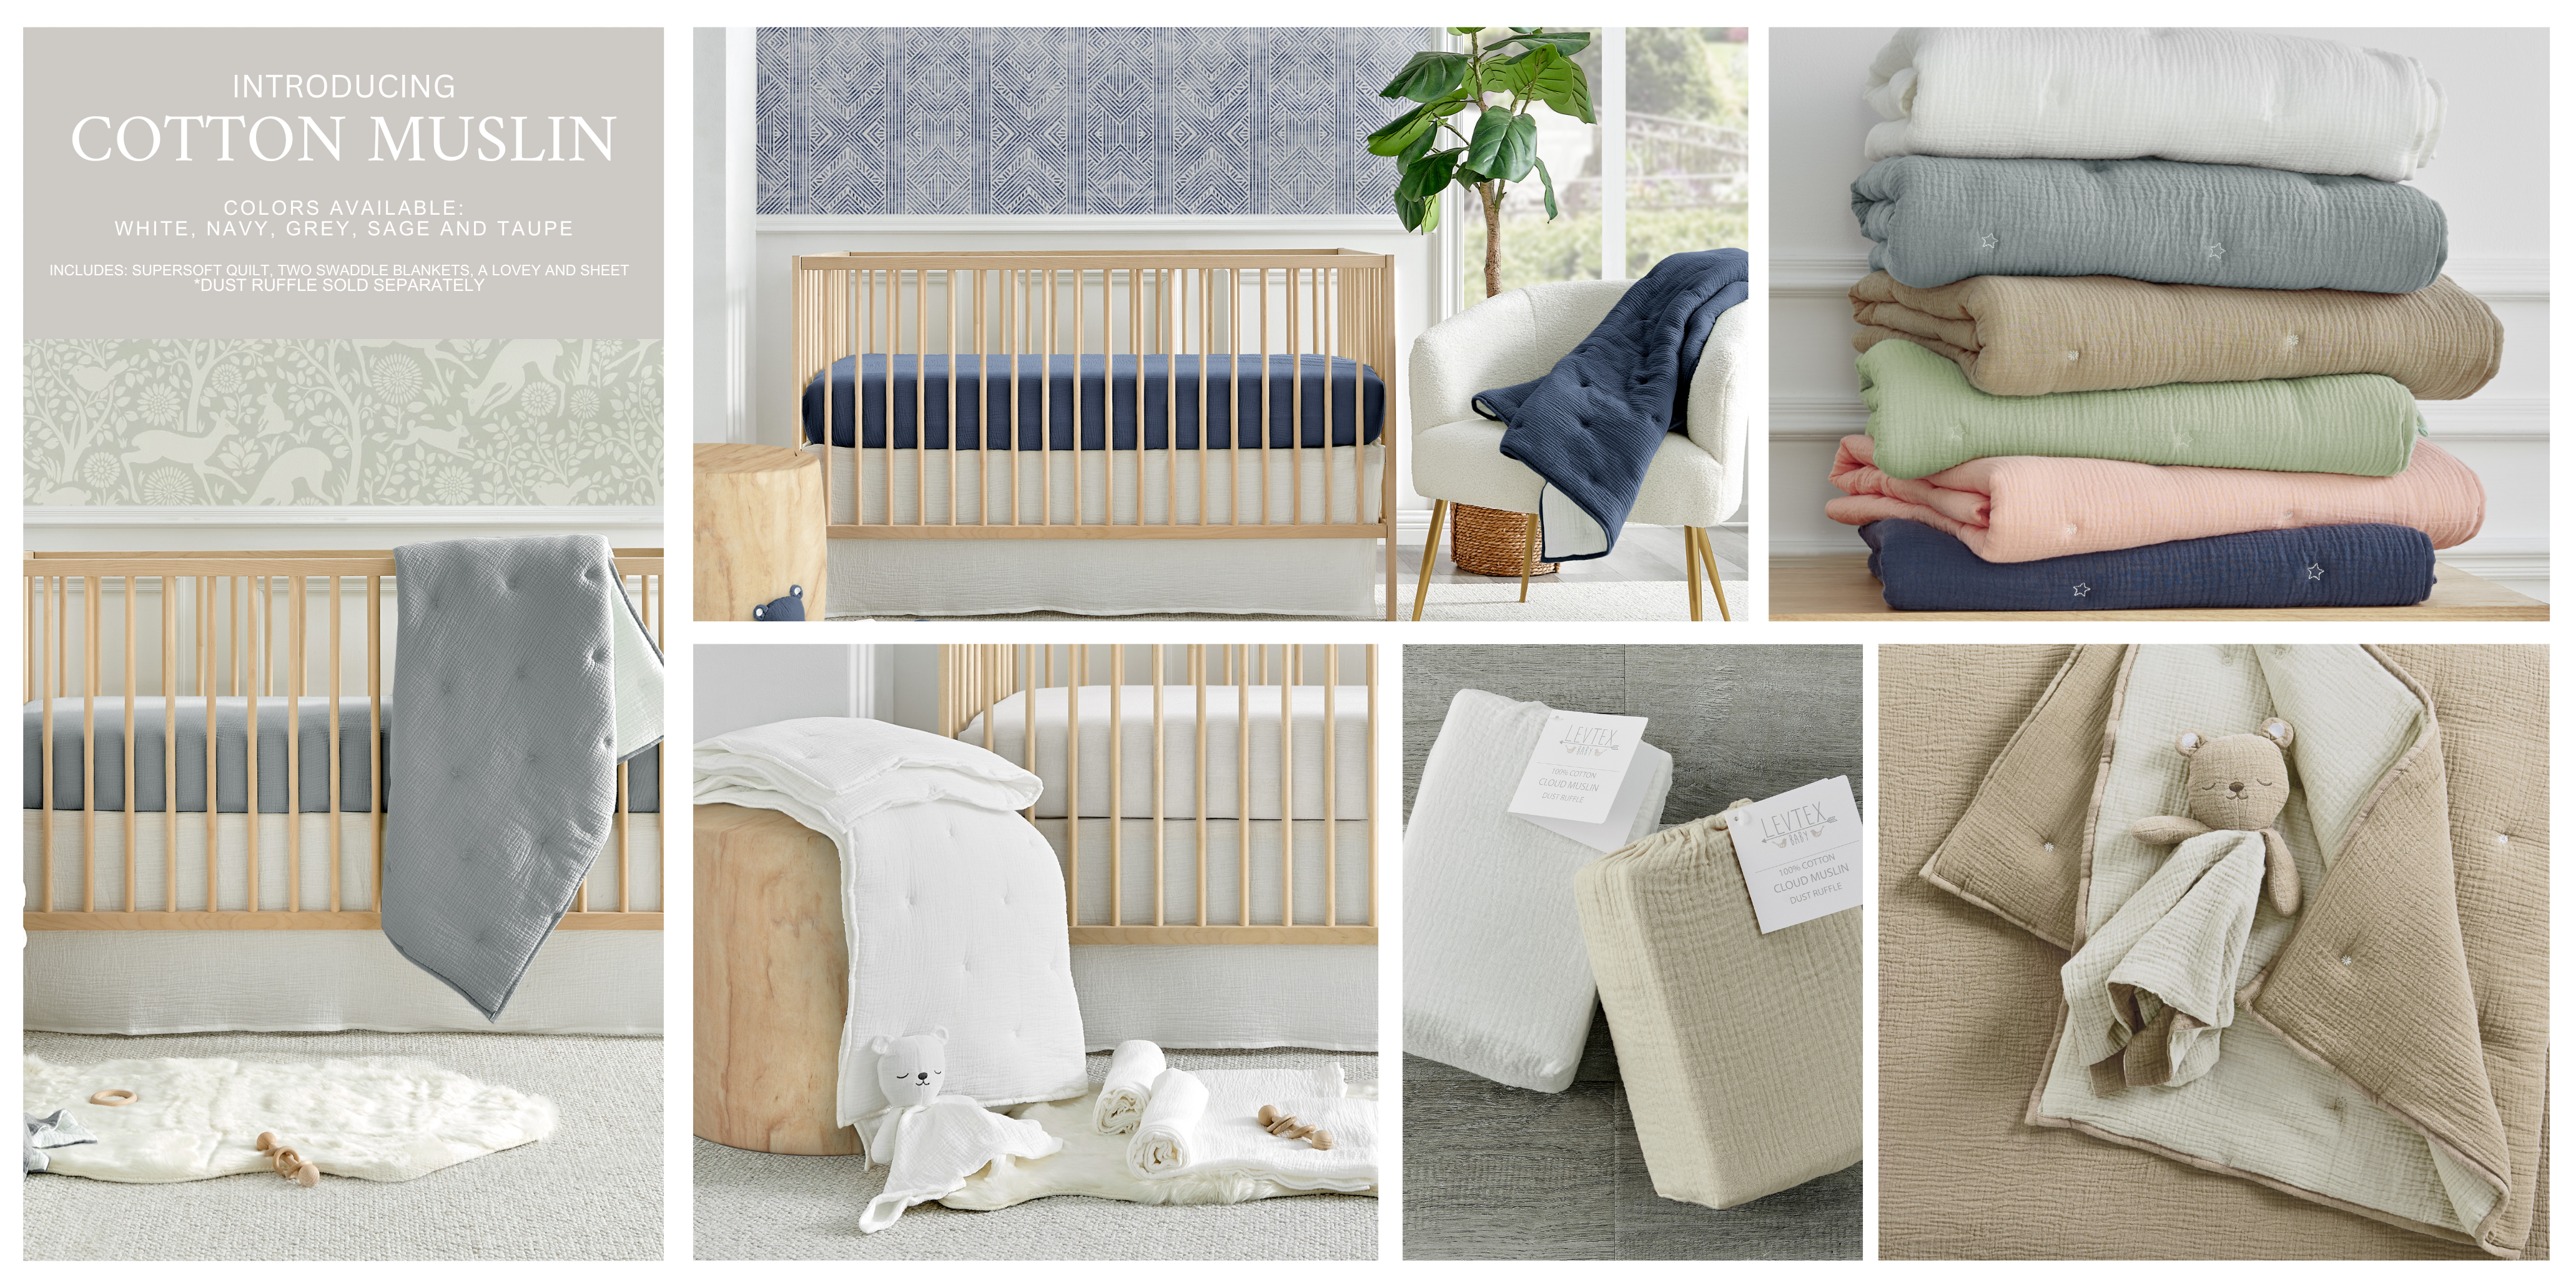 Introducing Cotton Muslin - The New 5 Piece Crib Bedding Set by Levtex Baby